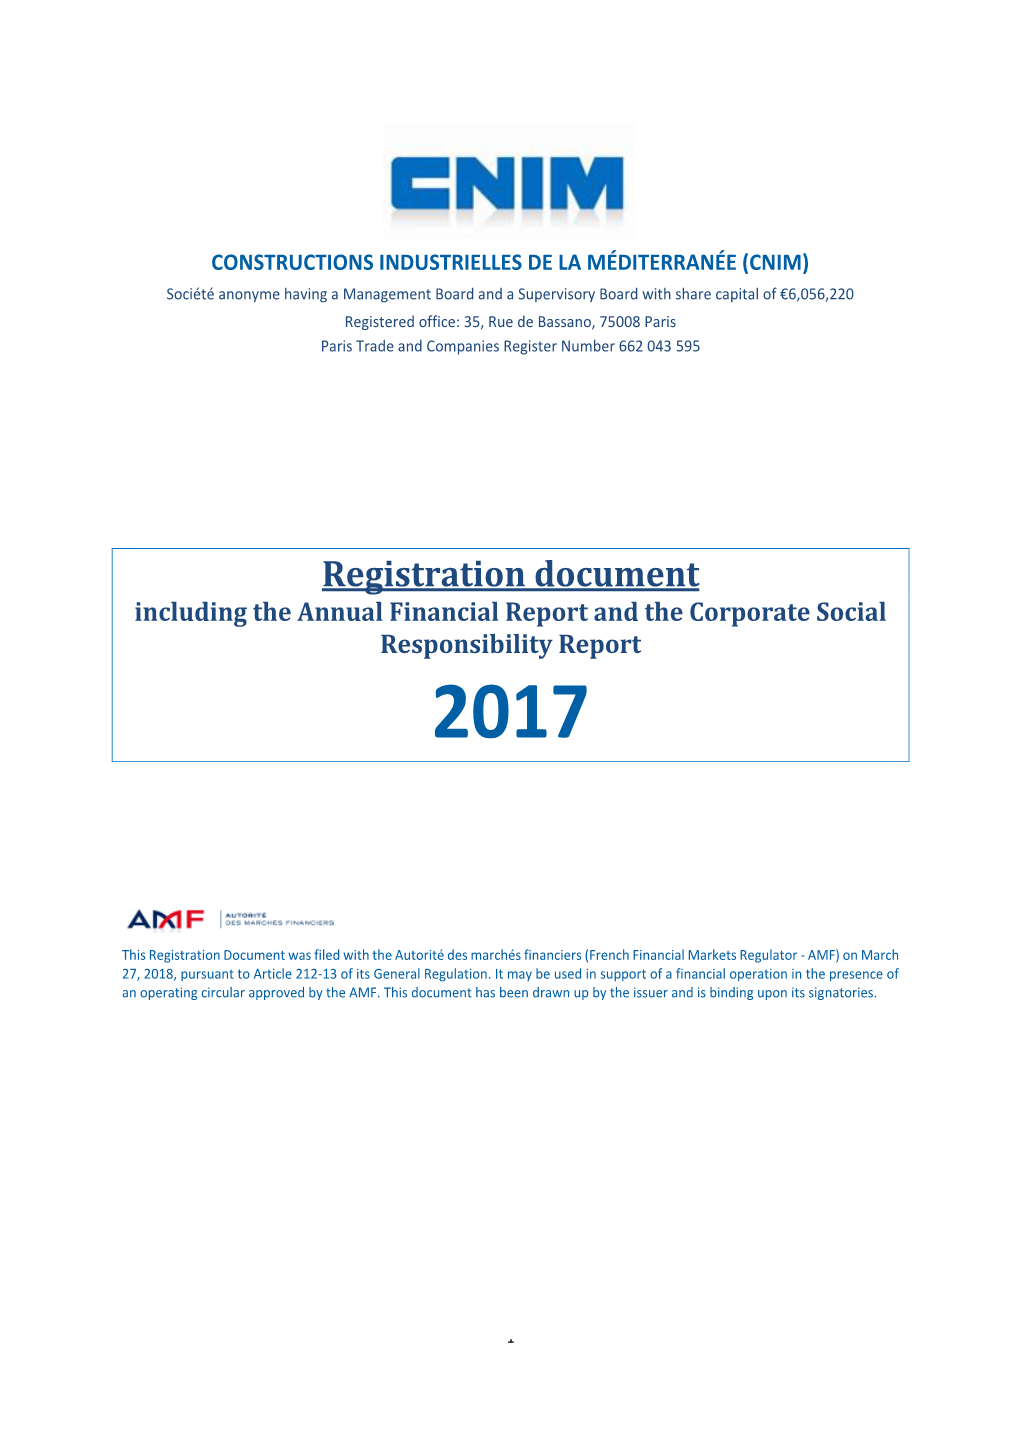 Registration Document Including the Annual Financial Report and the Corporate Social Responsibility Report 2017